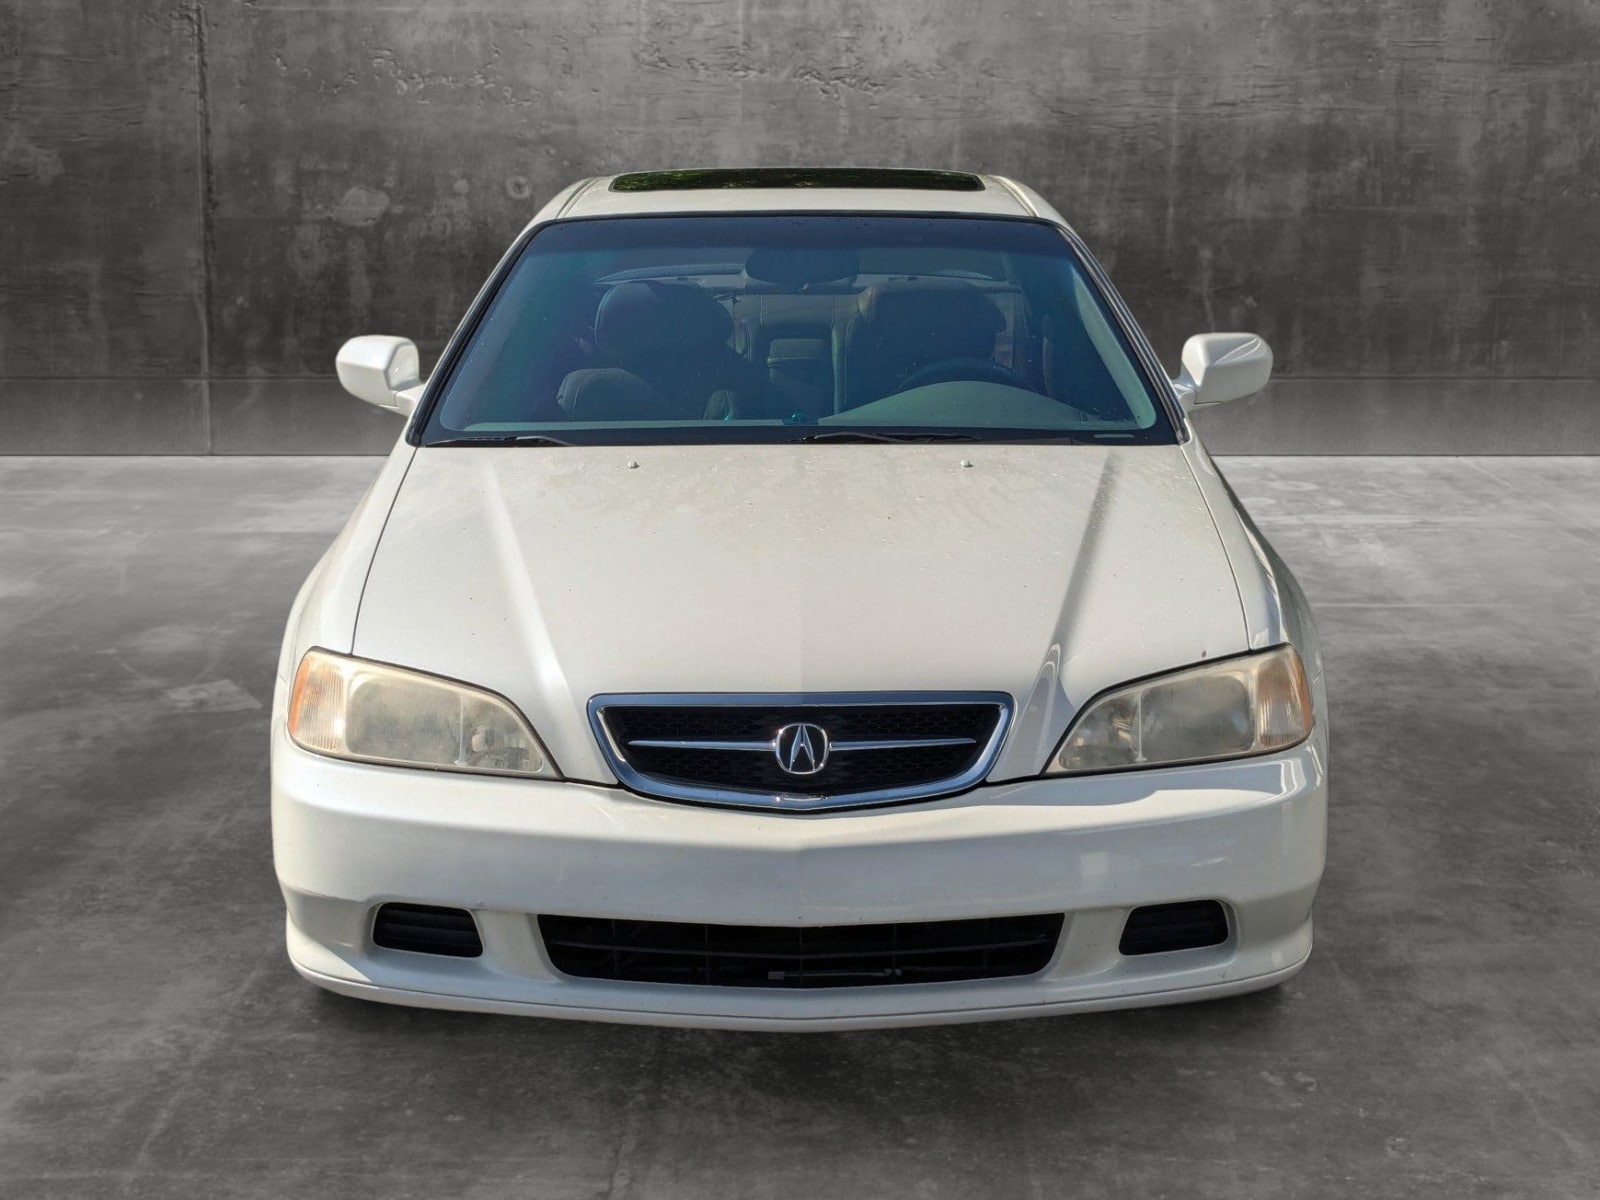 Used 2000 Acura TL Base with VIN 19UUA5666YA065515 for sale in Sanford, FL